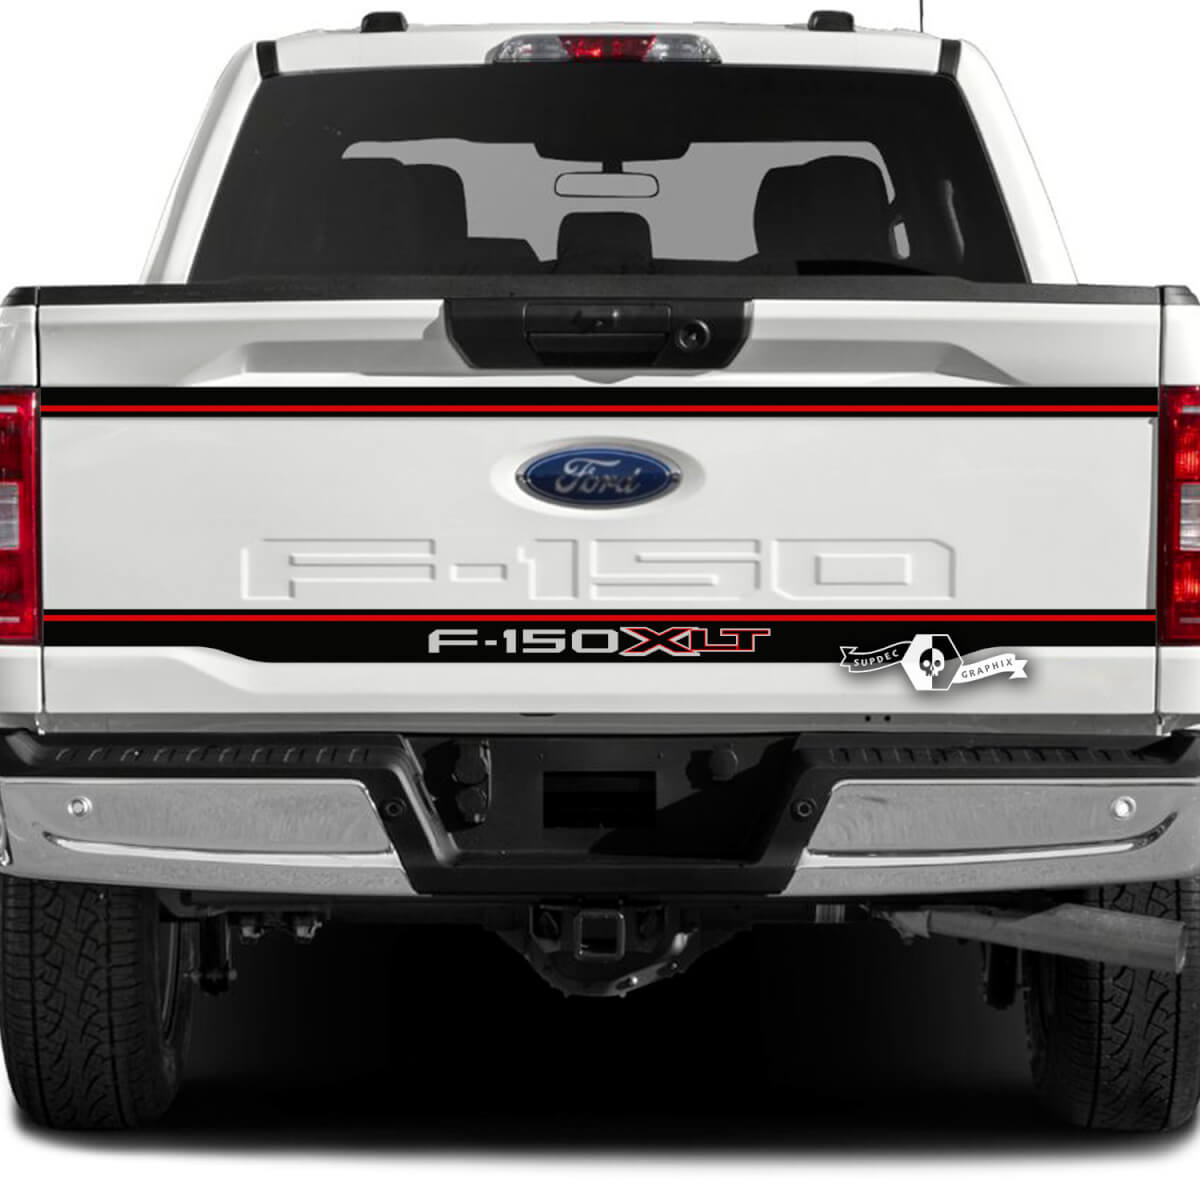 Ford F-150 XLT Tailgate Stripe Logo Graphics Side Decals Stickers 2 Colors
